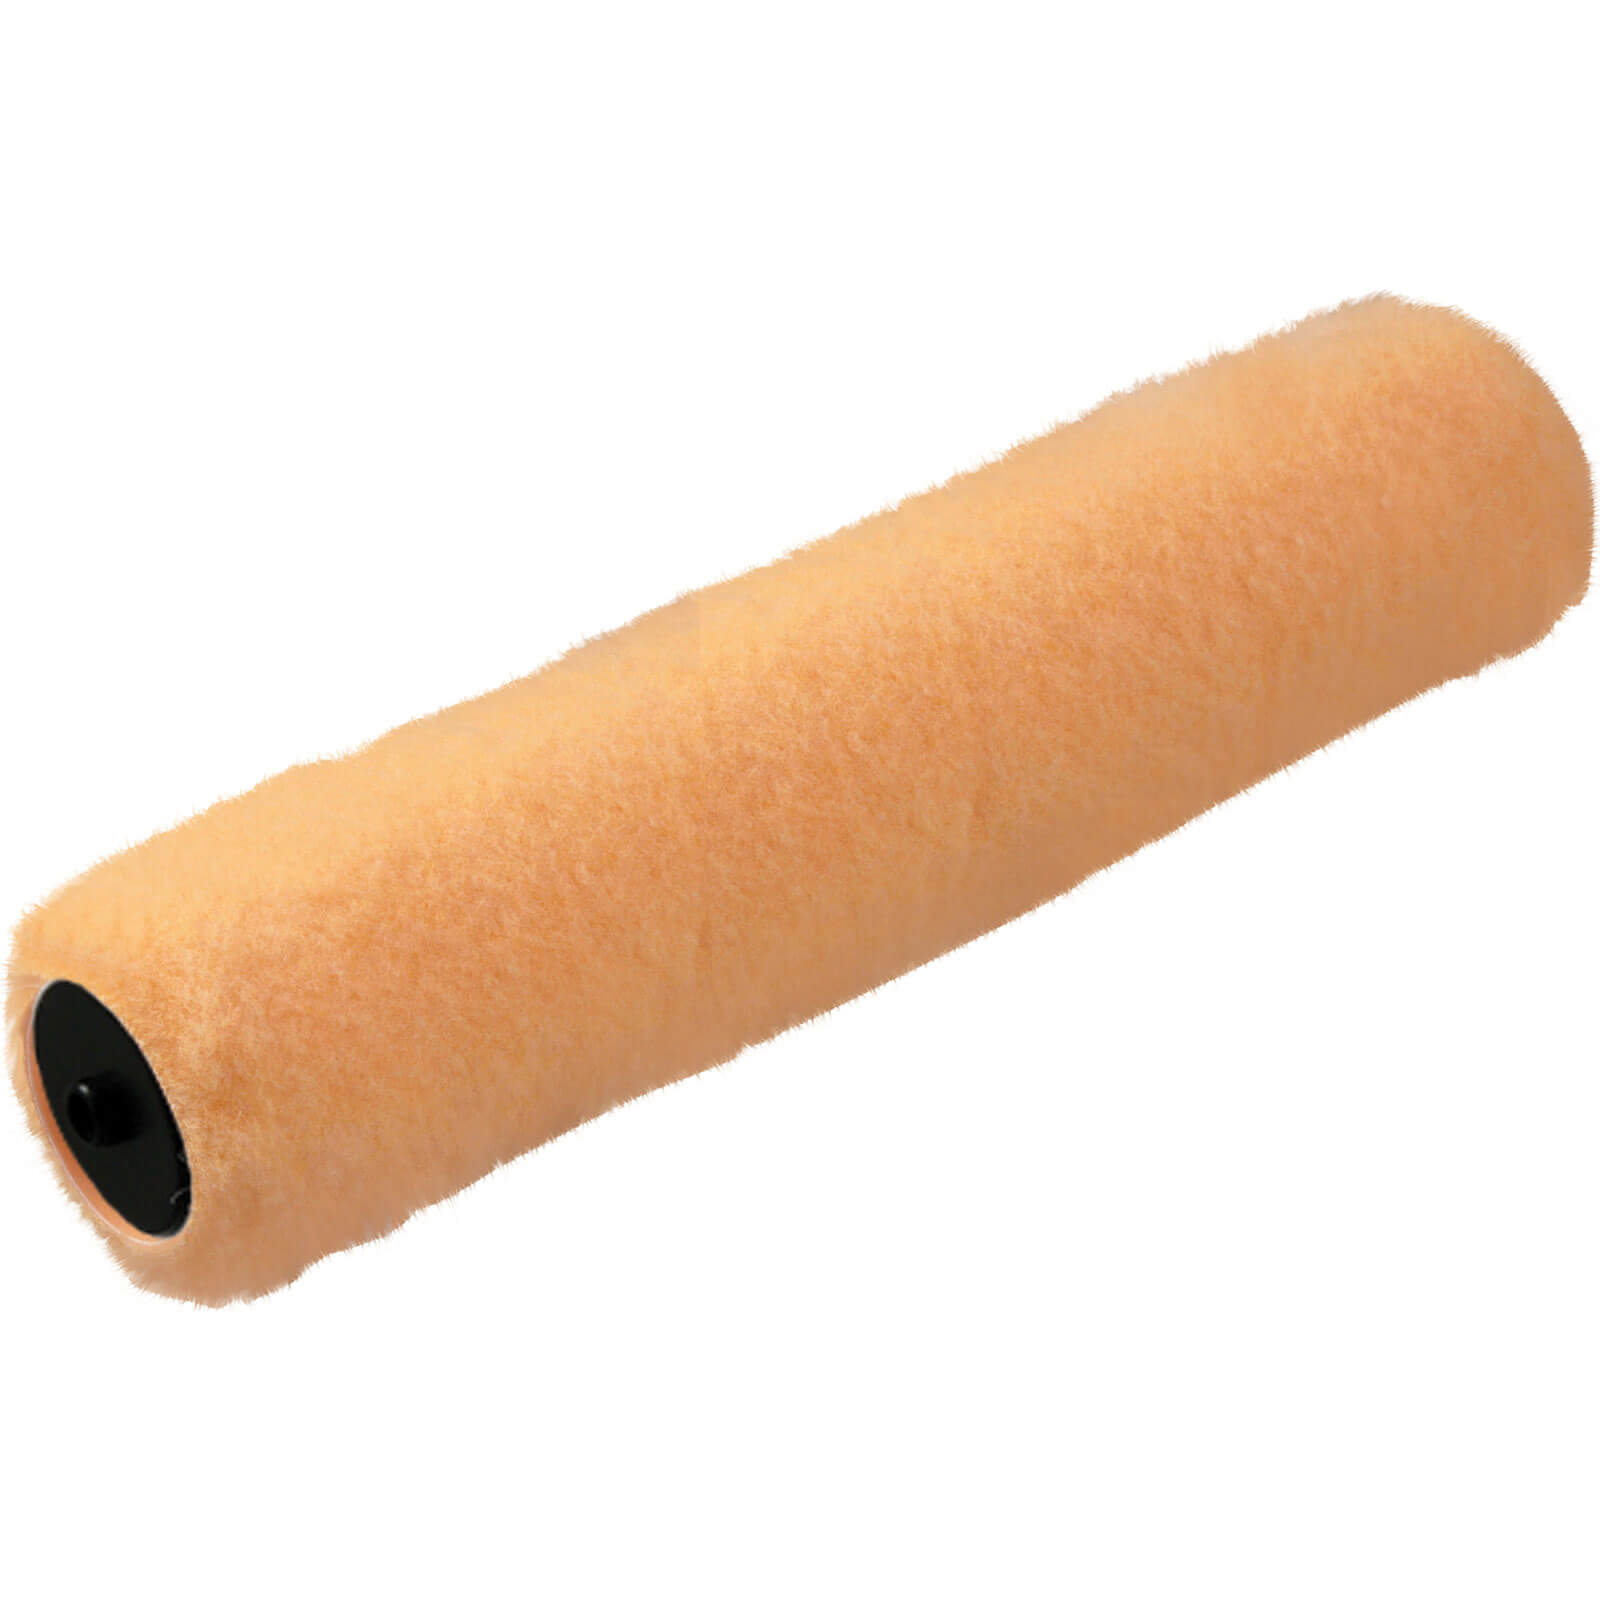 Image of Stanley Extra Long Pile Paint Roller Sleeve 44mm 300mm